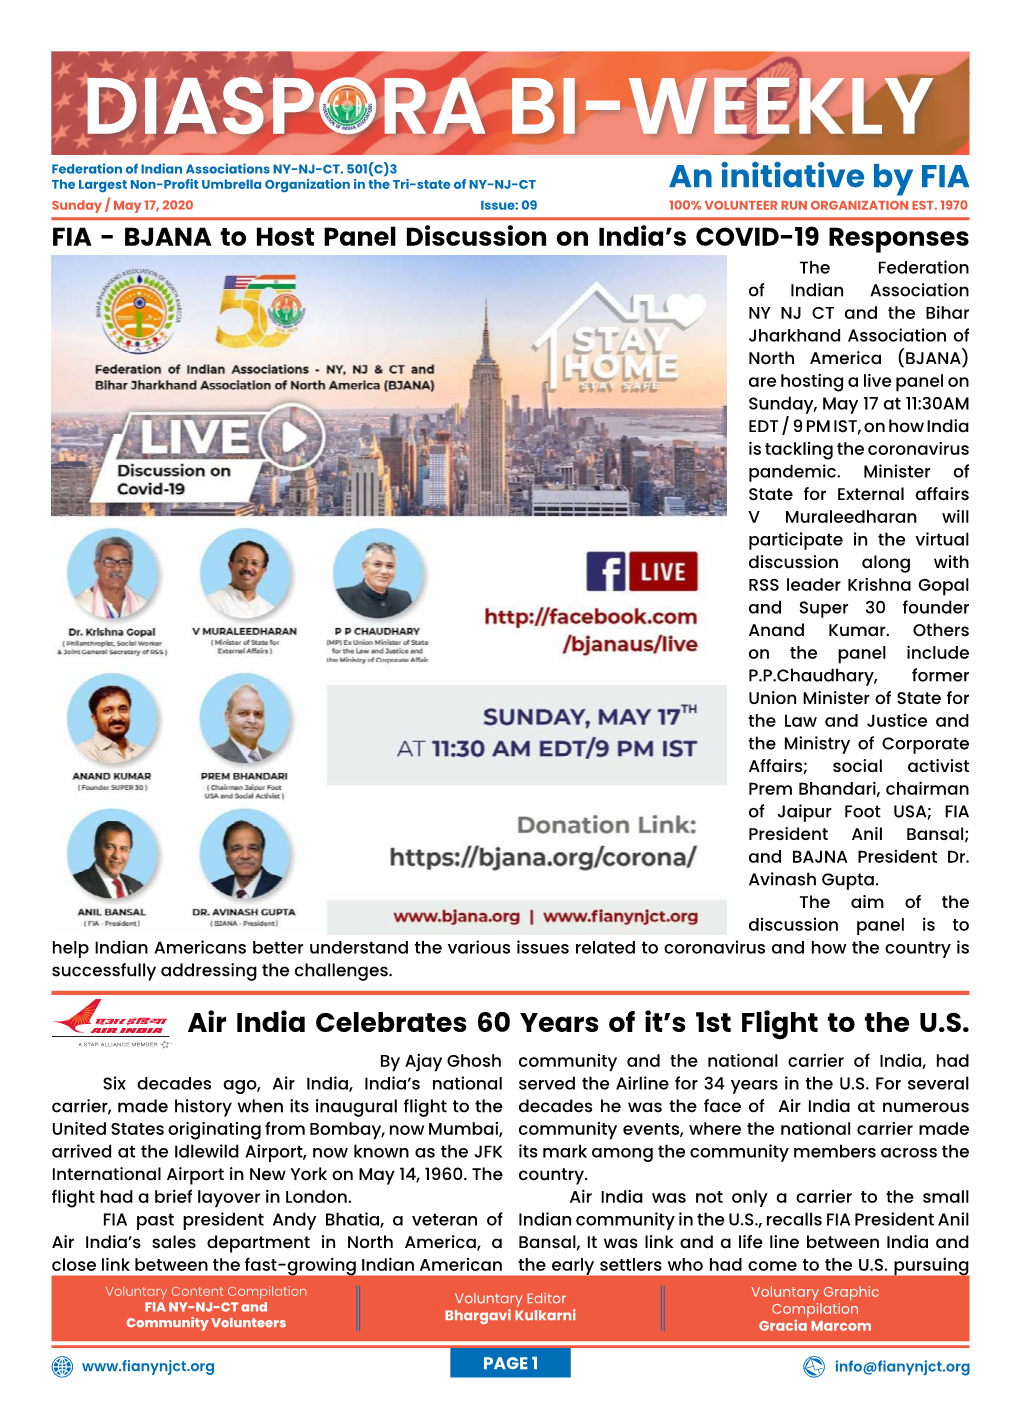 Air India Celebrates 60 Years of It's 1St Flight to the U.S